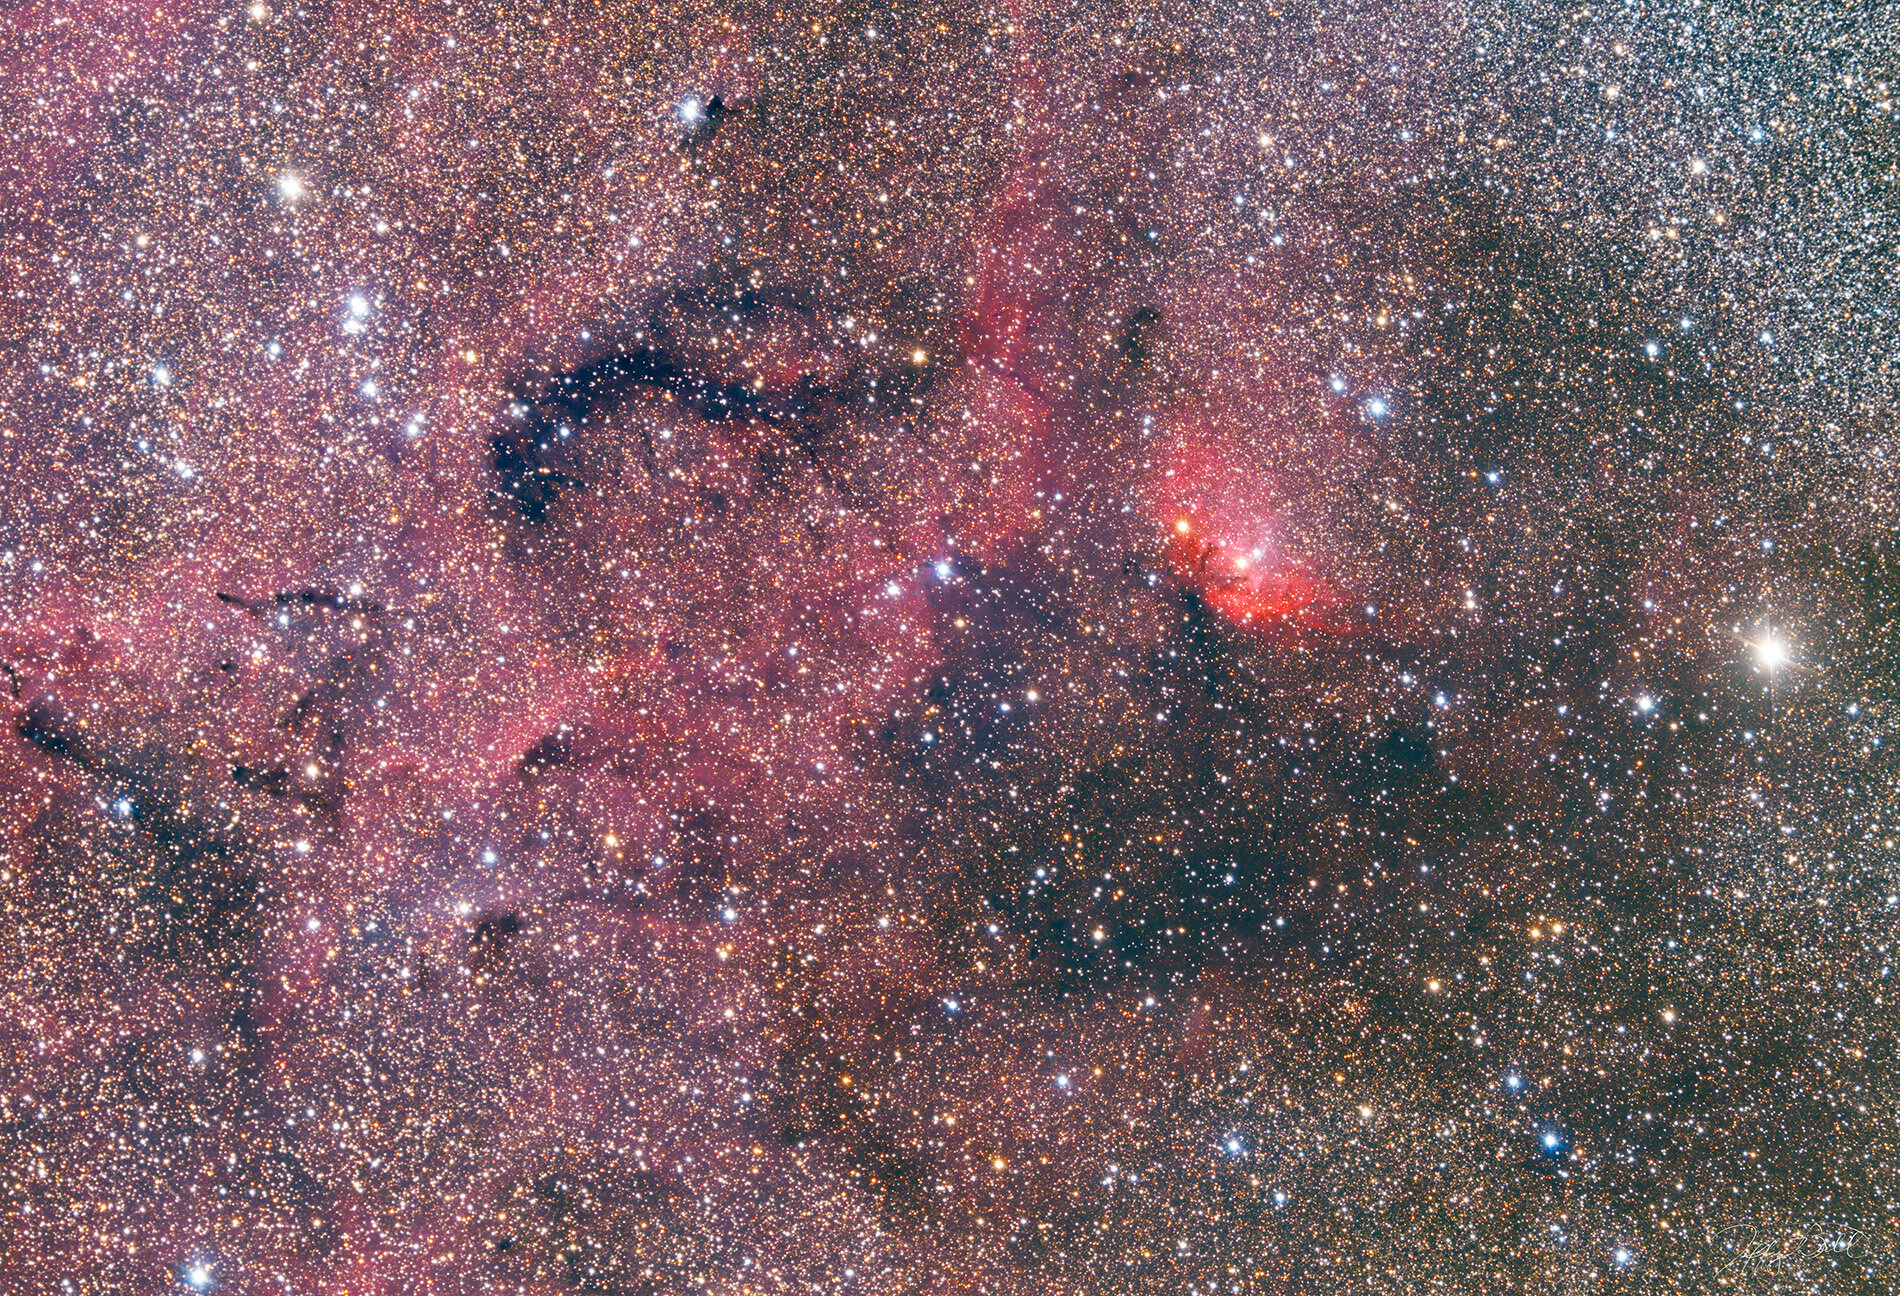 Fish on the Platter region featuring portions of B144 in Cygnus.  